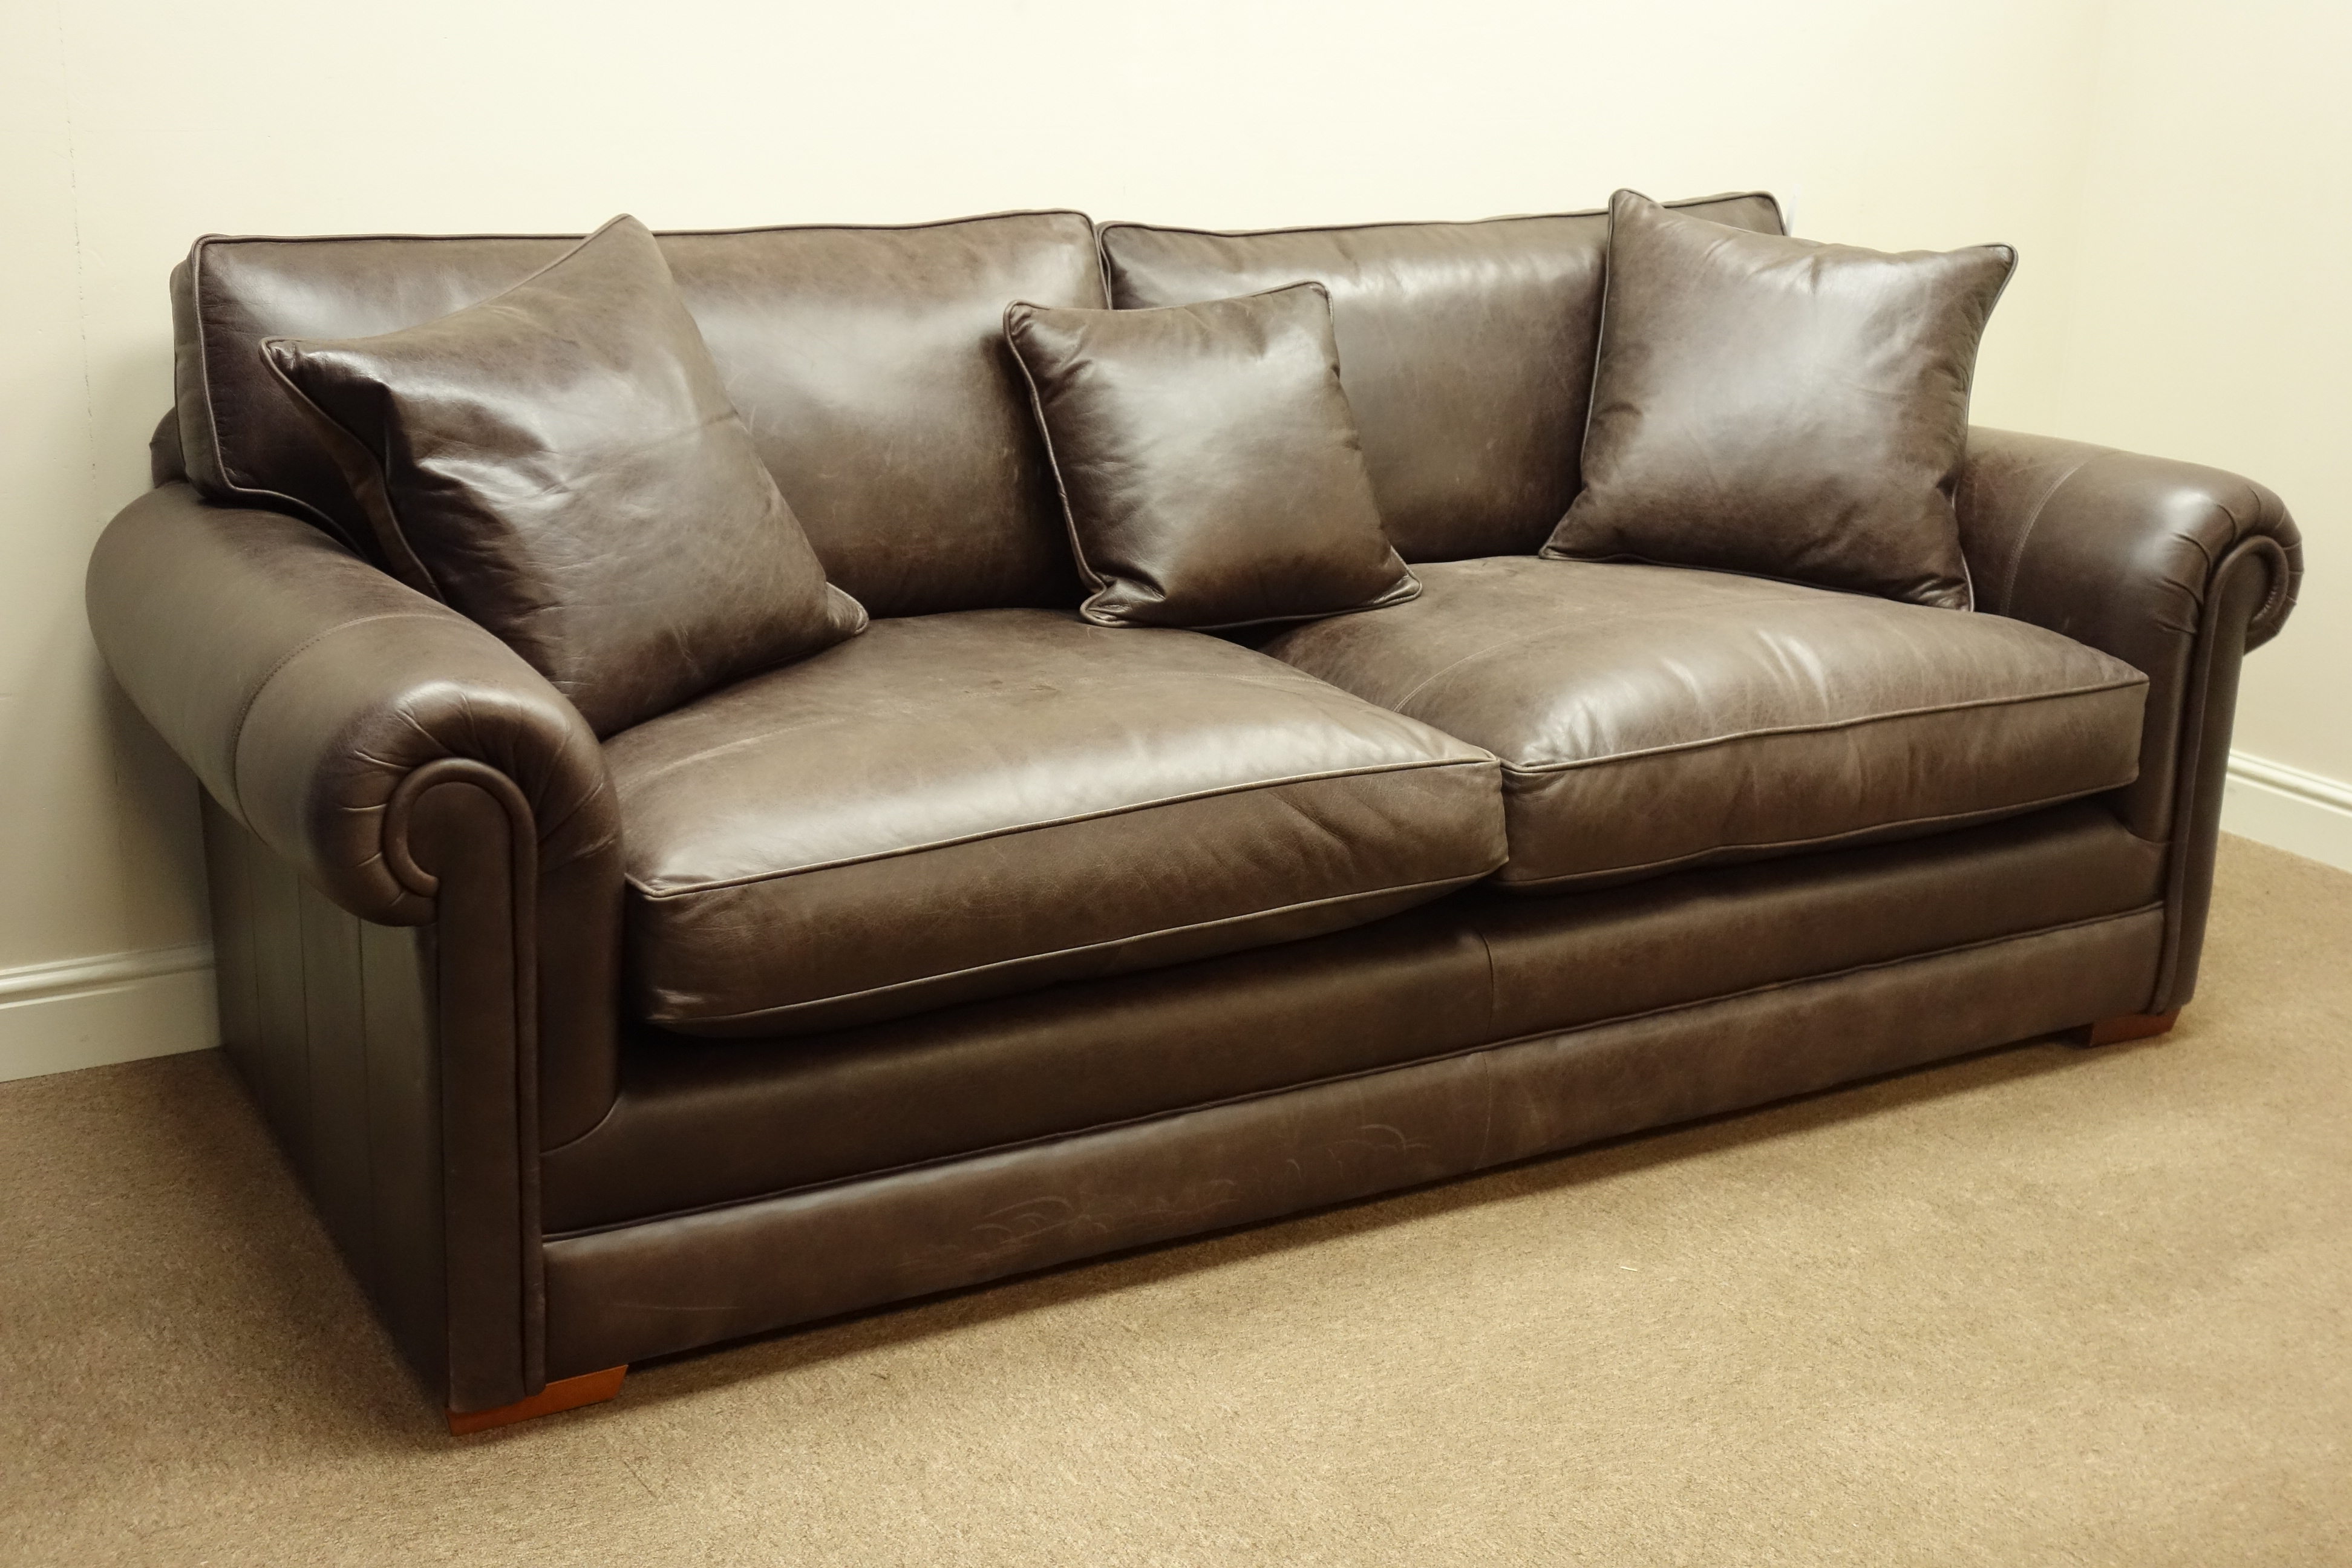 Large three seater sofa upholstered in brown 'Derwent' leather, with scatter cushions,